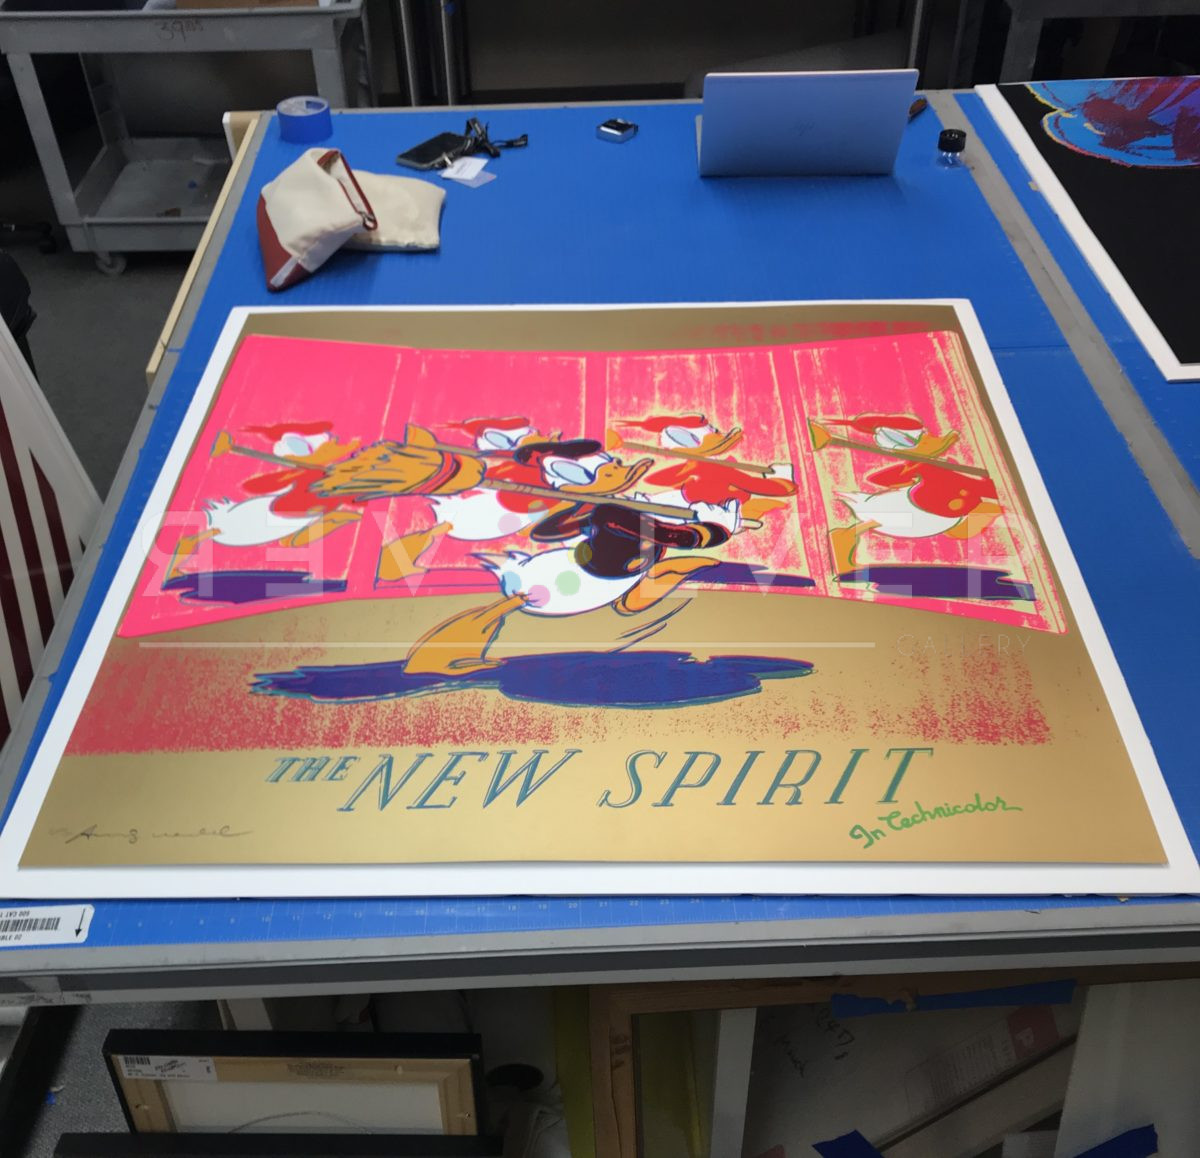 The New Spirit (Donald Duck) screen print out of frame